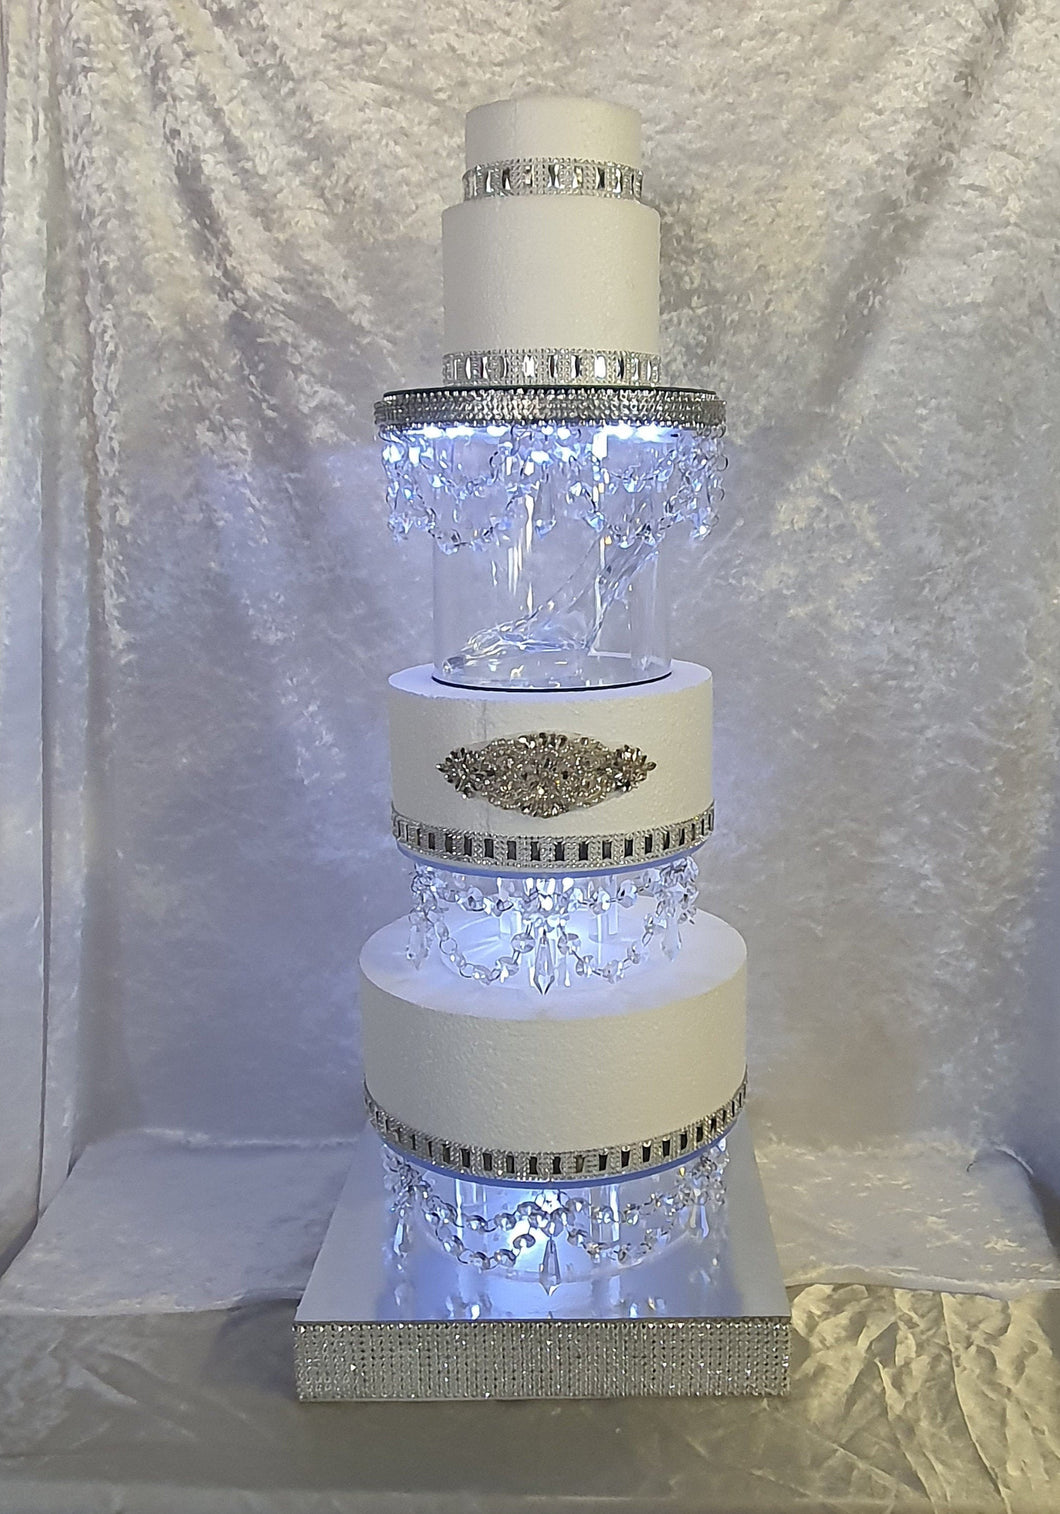 Glass slipper cake divider plus 2 crystal dividers - set of 3 pieces with LED lights. by Crystal wedding uk